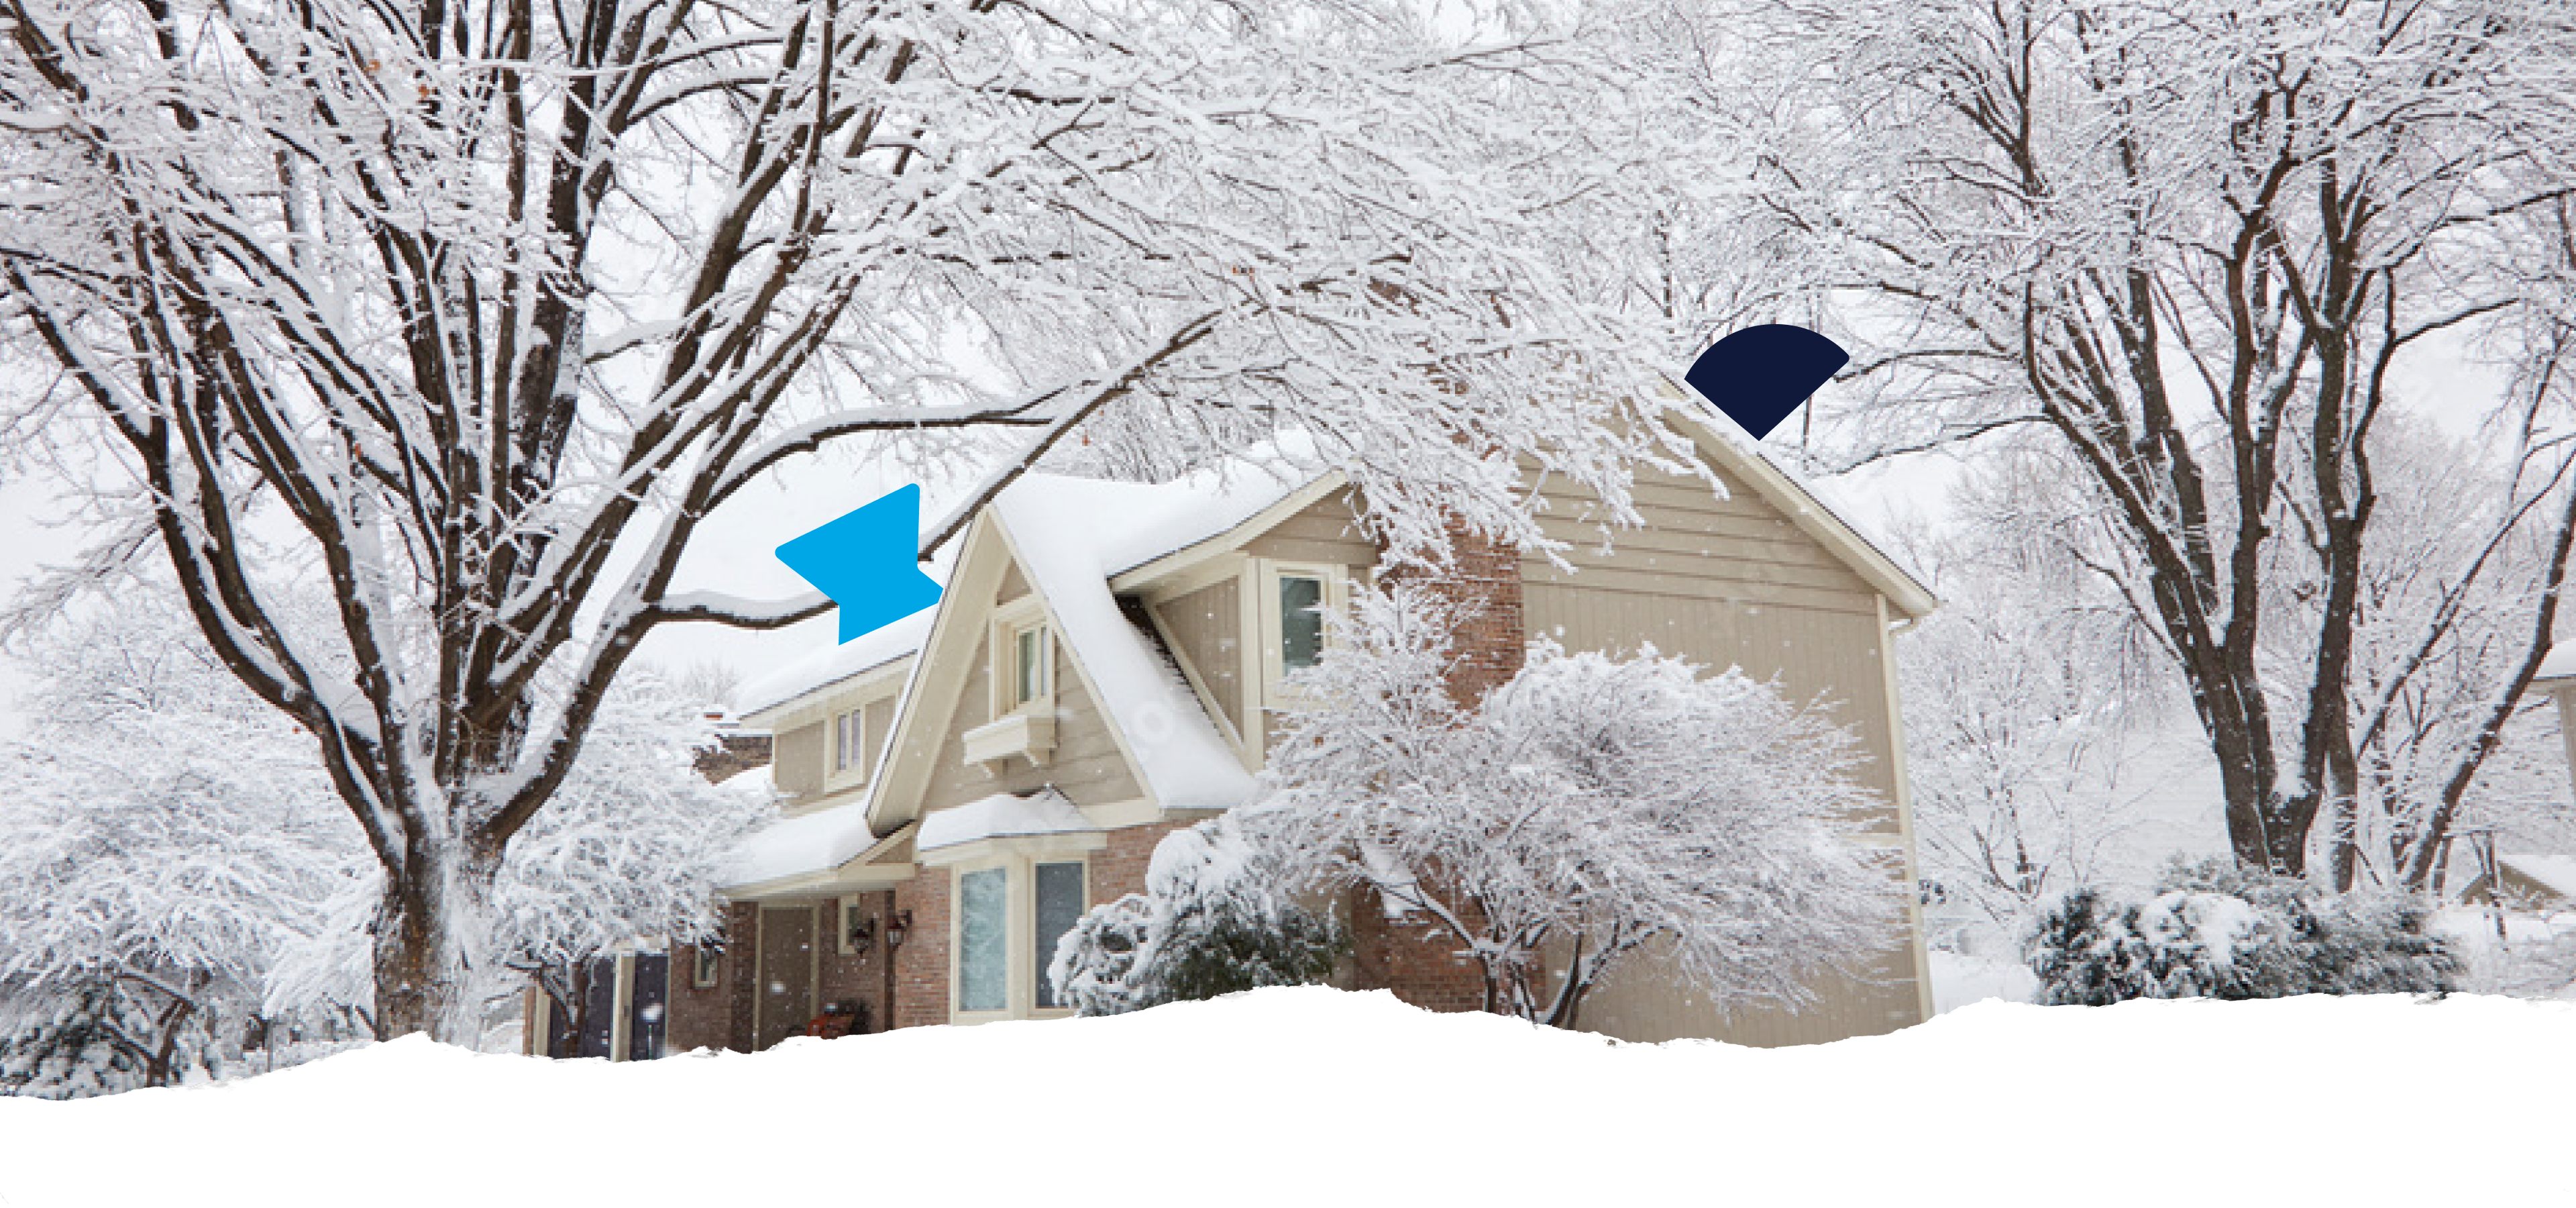 How to Winterize a House: Working With Your Tenants